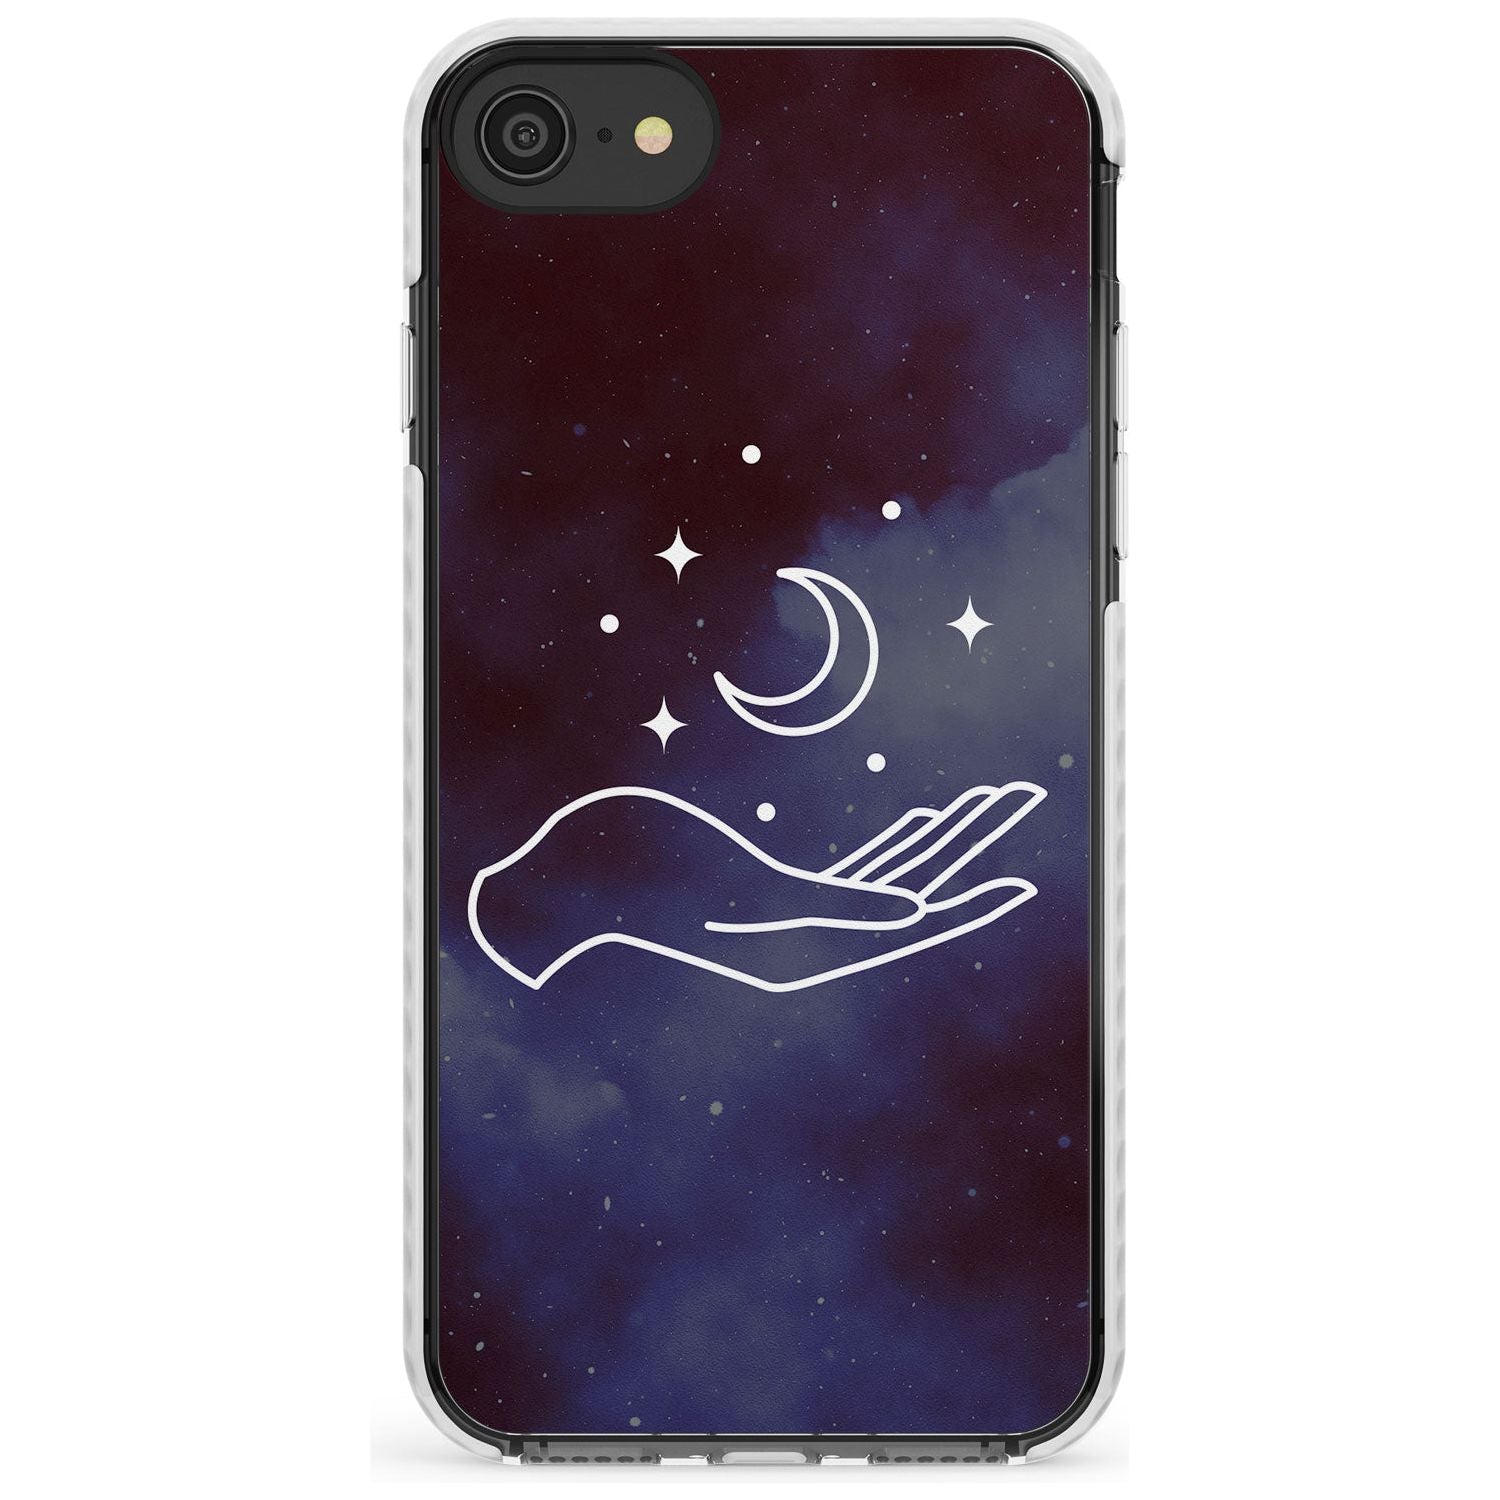 Floating Moon Above Hand Slim TPU Phone Case for iPhone SE 8 7 Plus